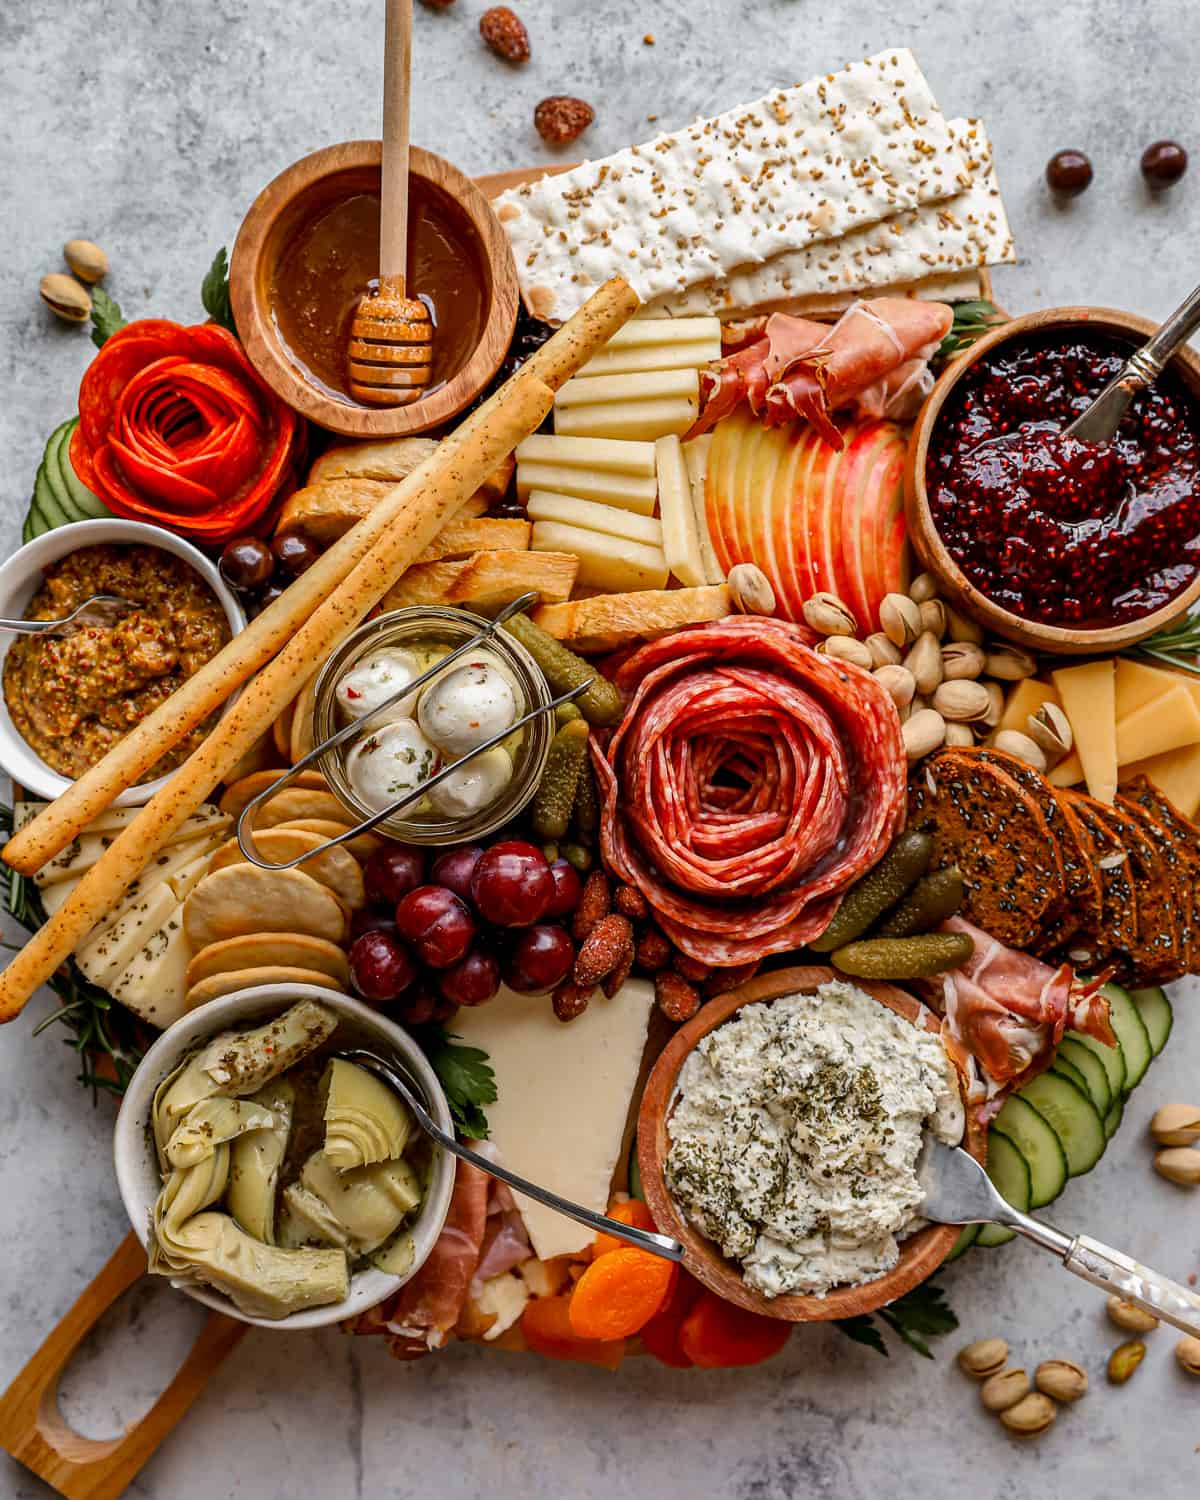 https://www.thecookierookie.com/wp-content/uploads/2023/08/how-to-make-a-charcuterie-board-recipe-3.jpg